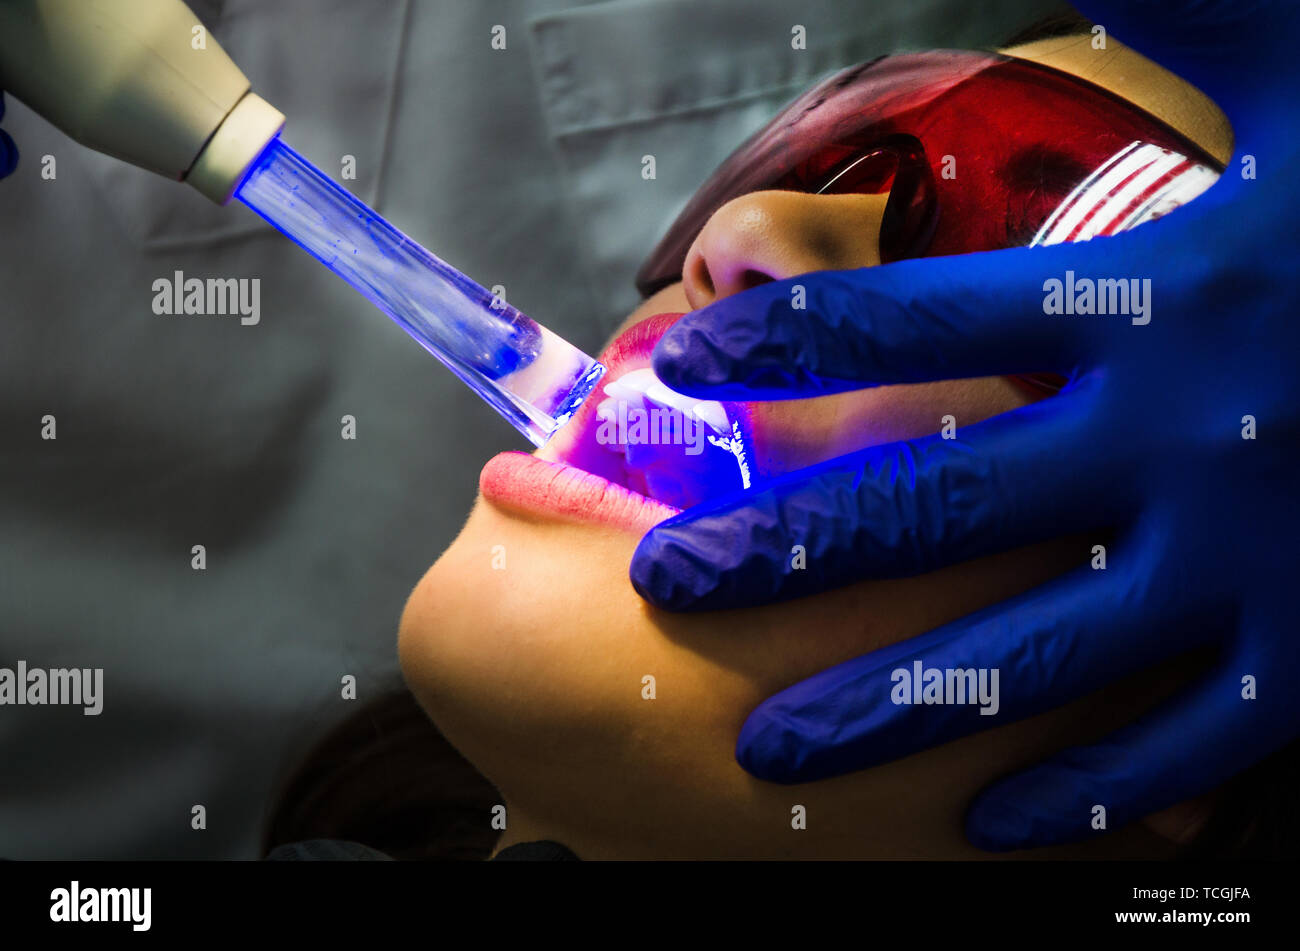 Dentist examining patient mouth in dental exam whitenening teeth with dentist's instrumentation in clinic. Stock Photo